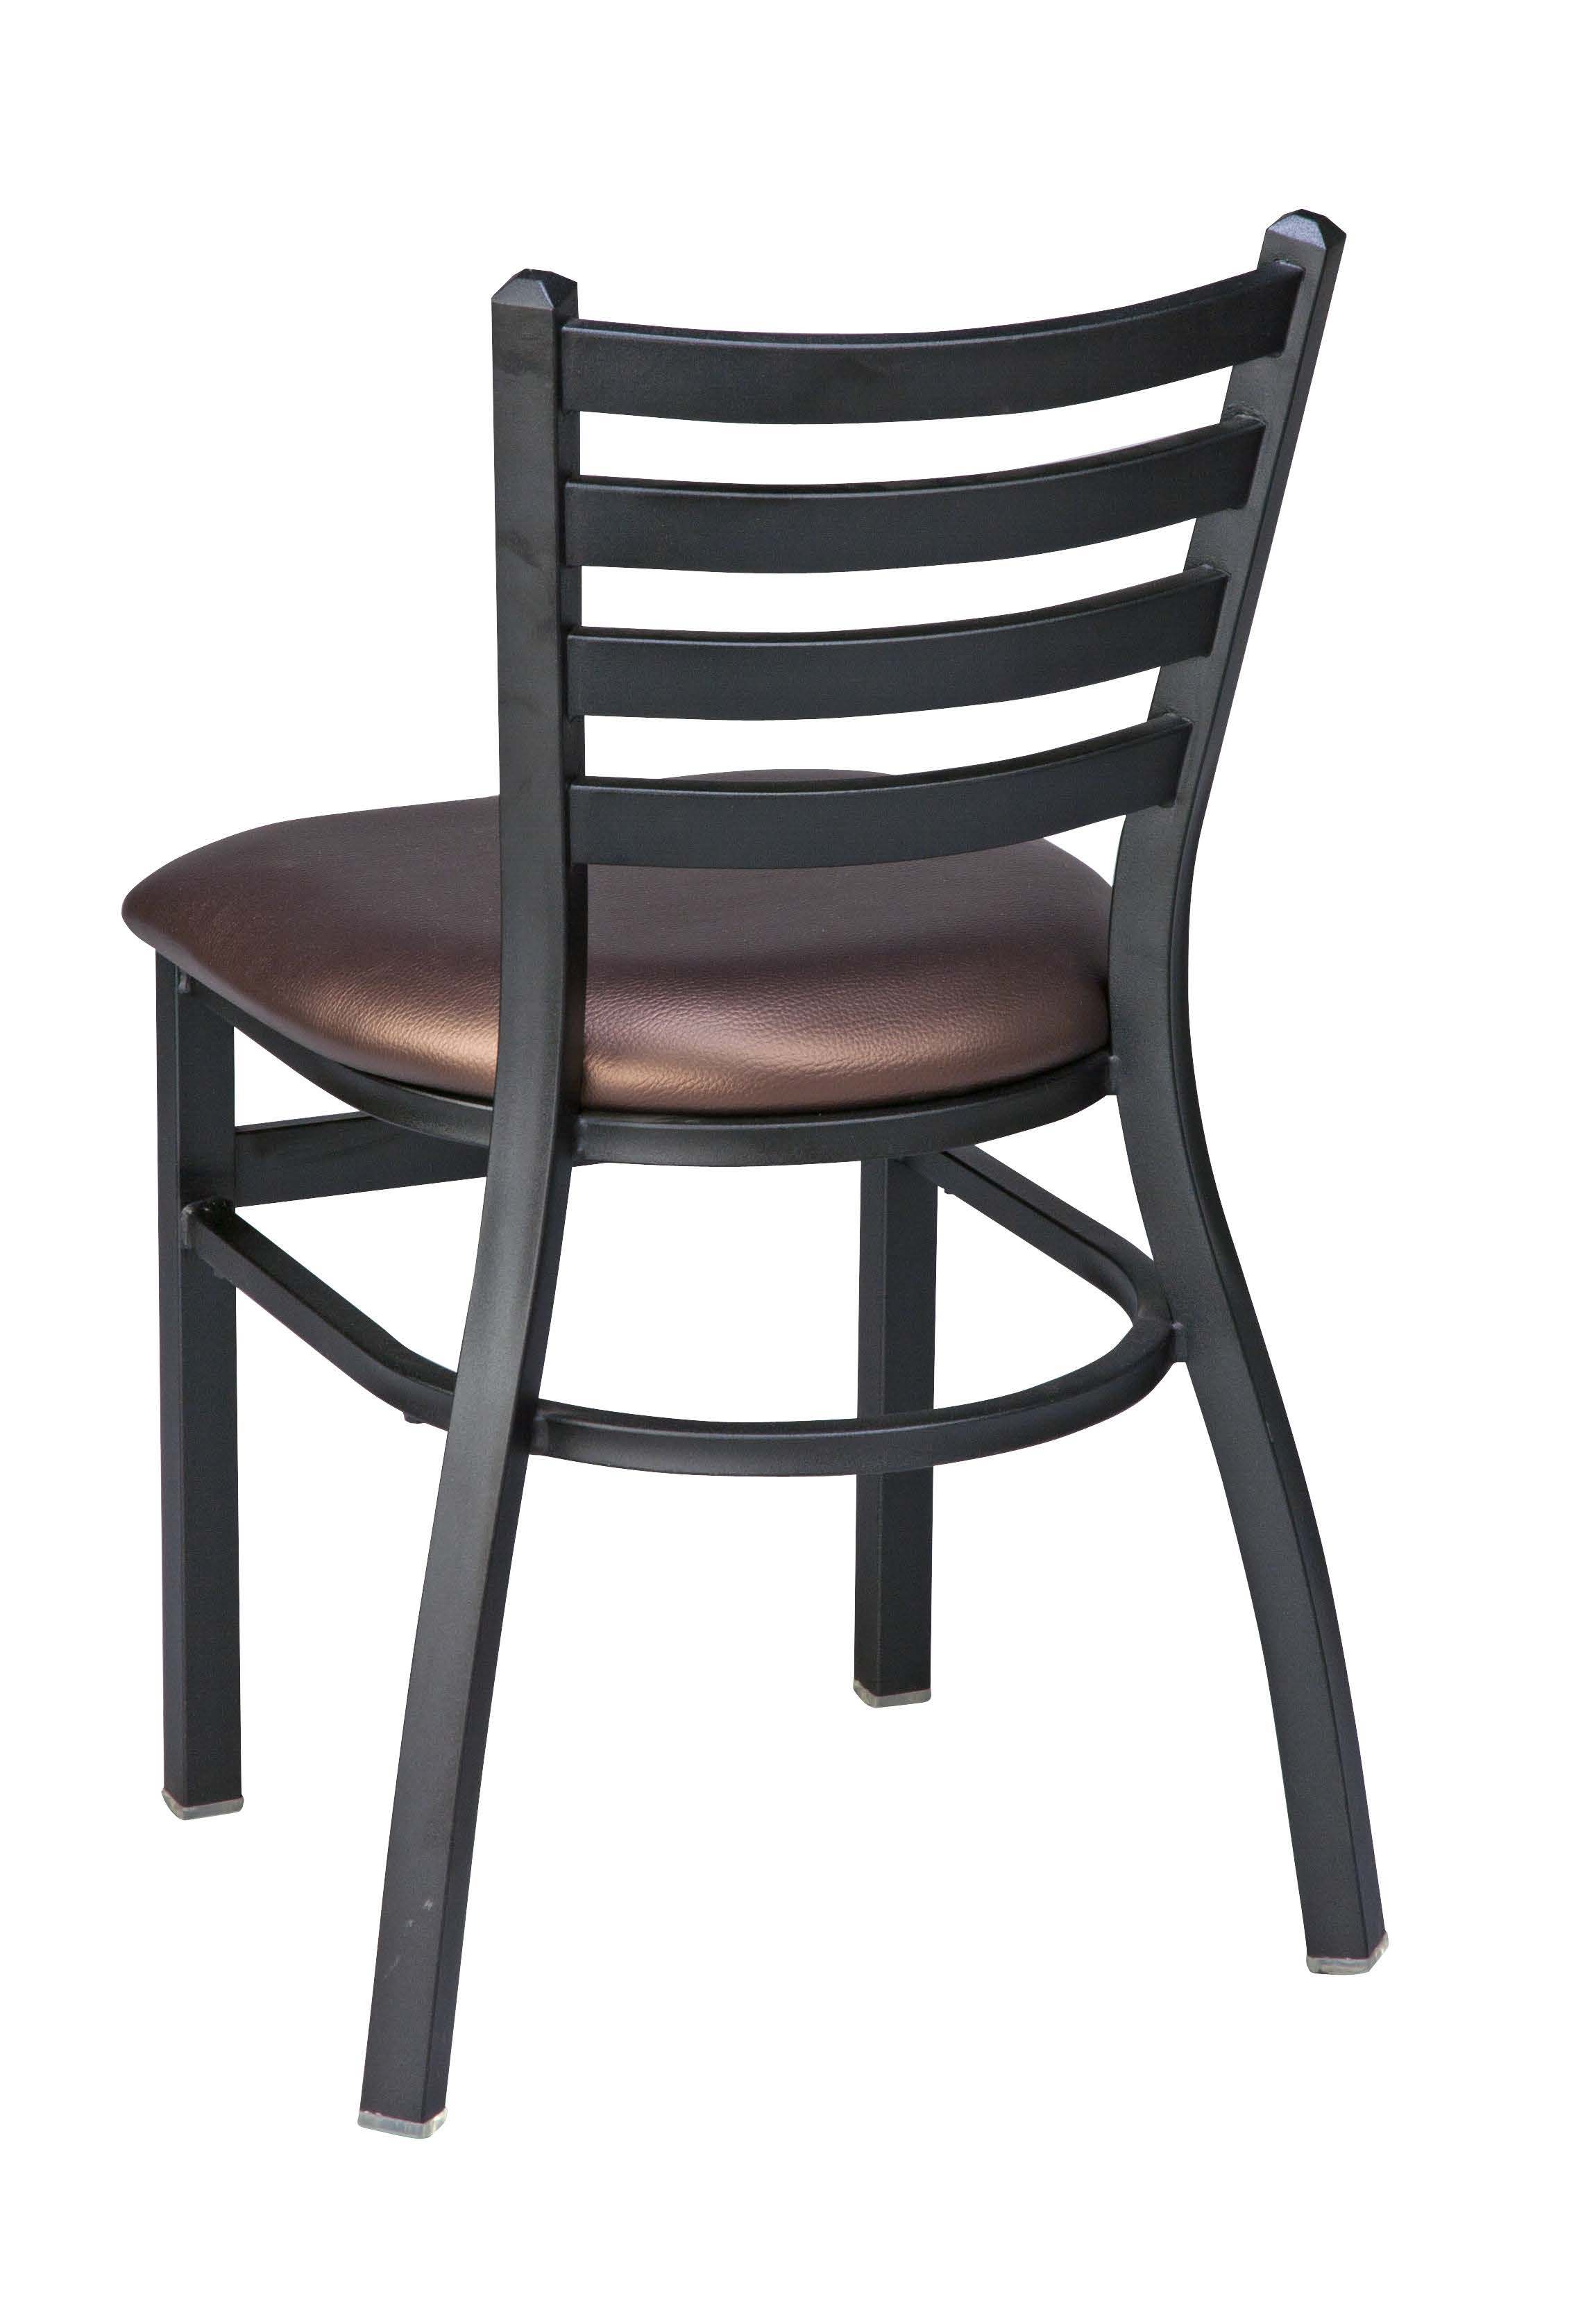 Regal 616 Nesting Steel Frame Chairs, Steel Frame chairs